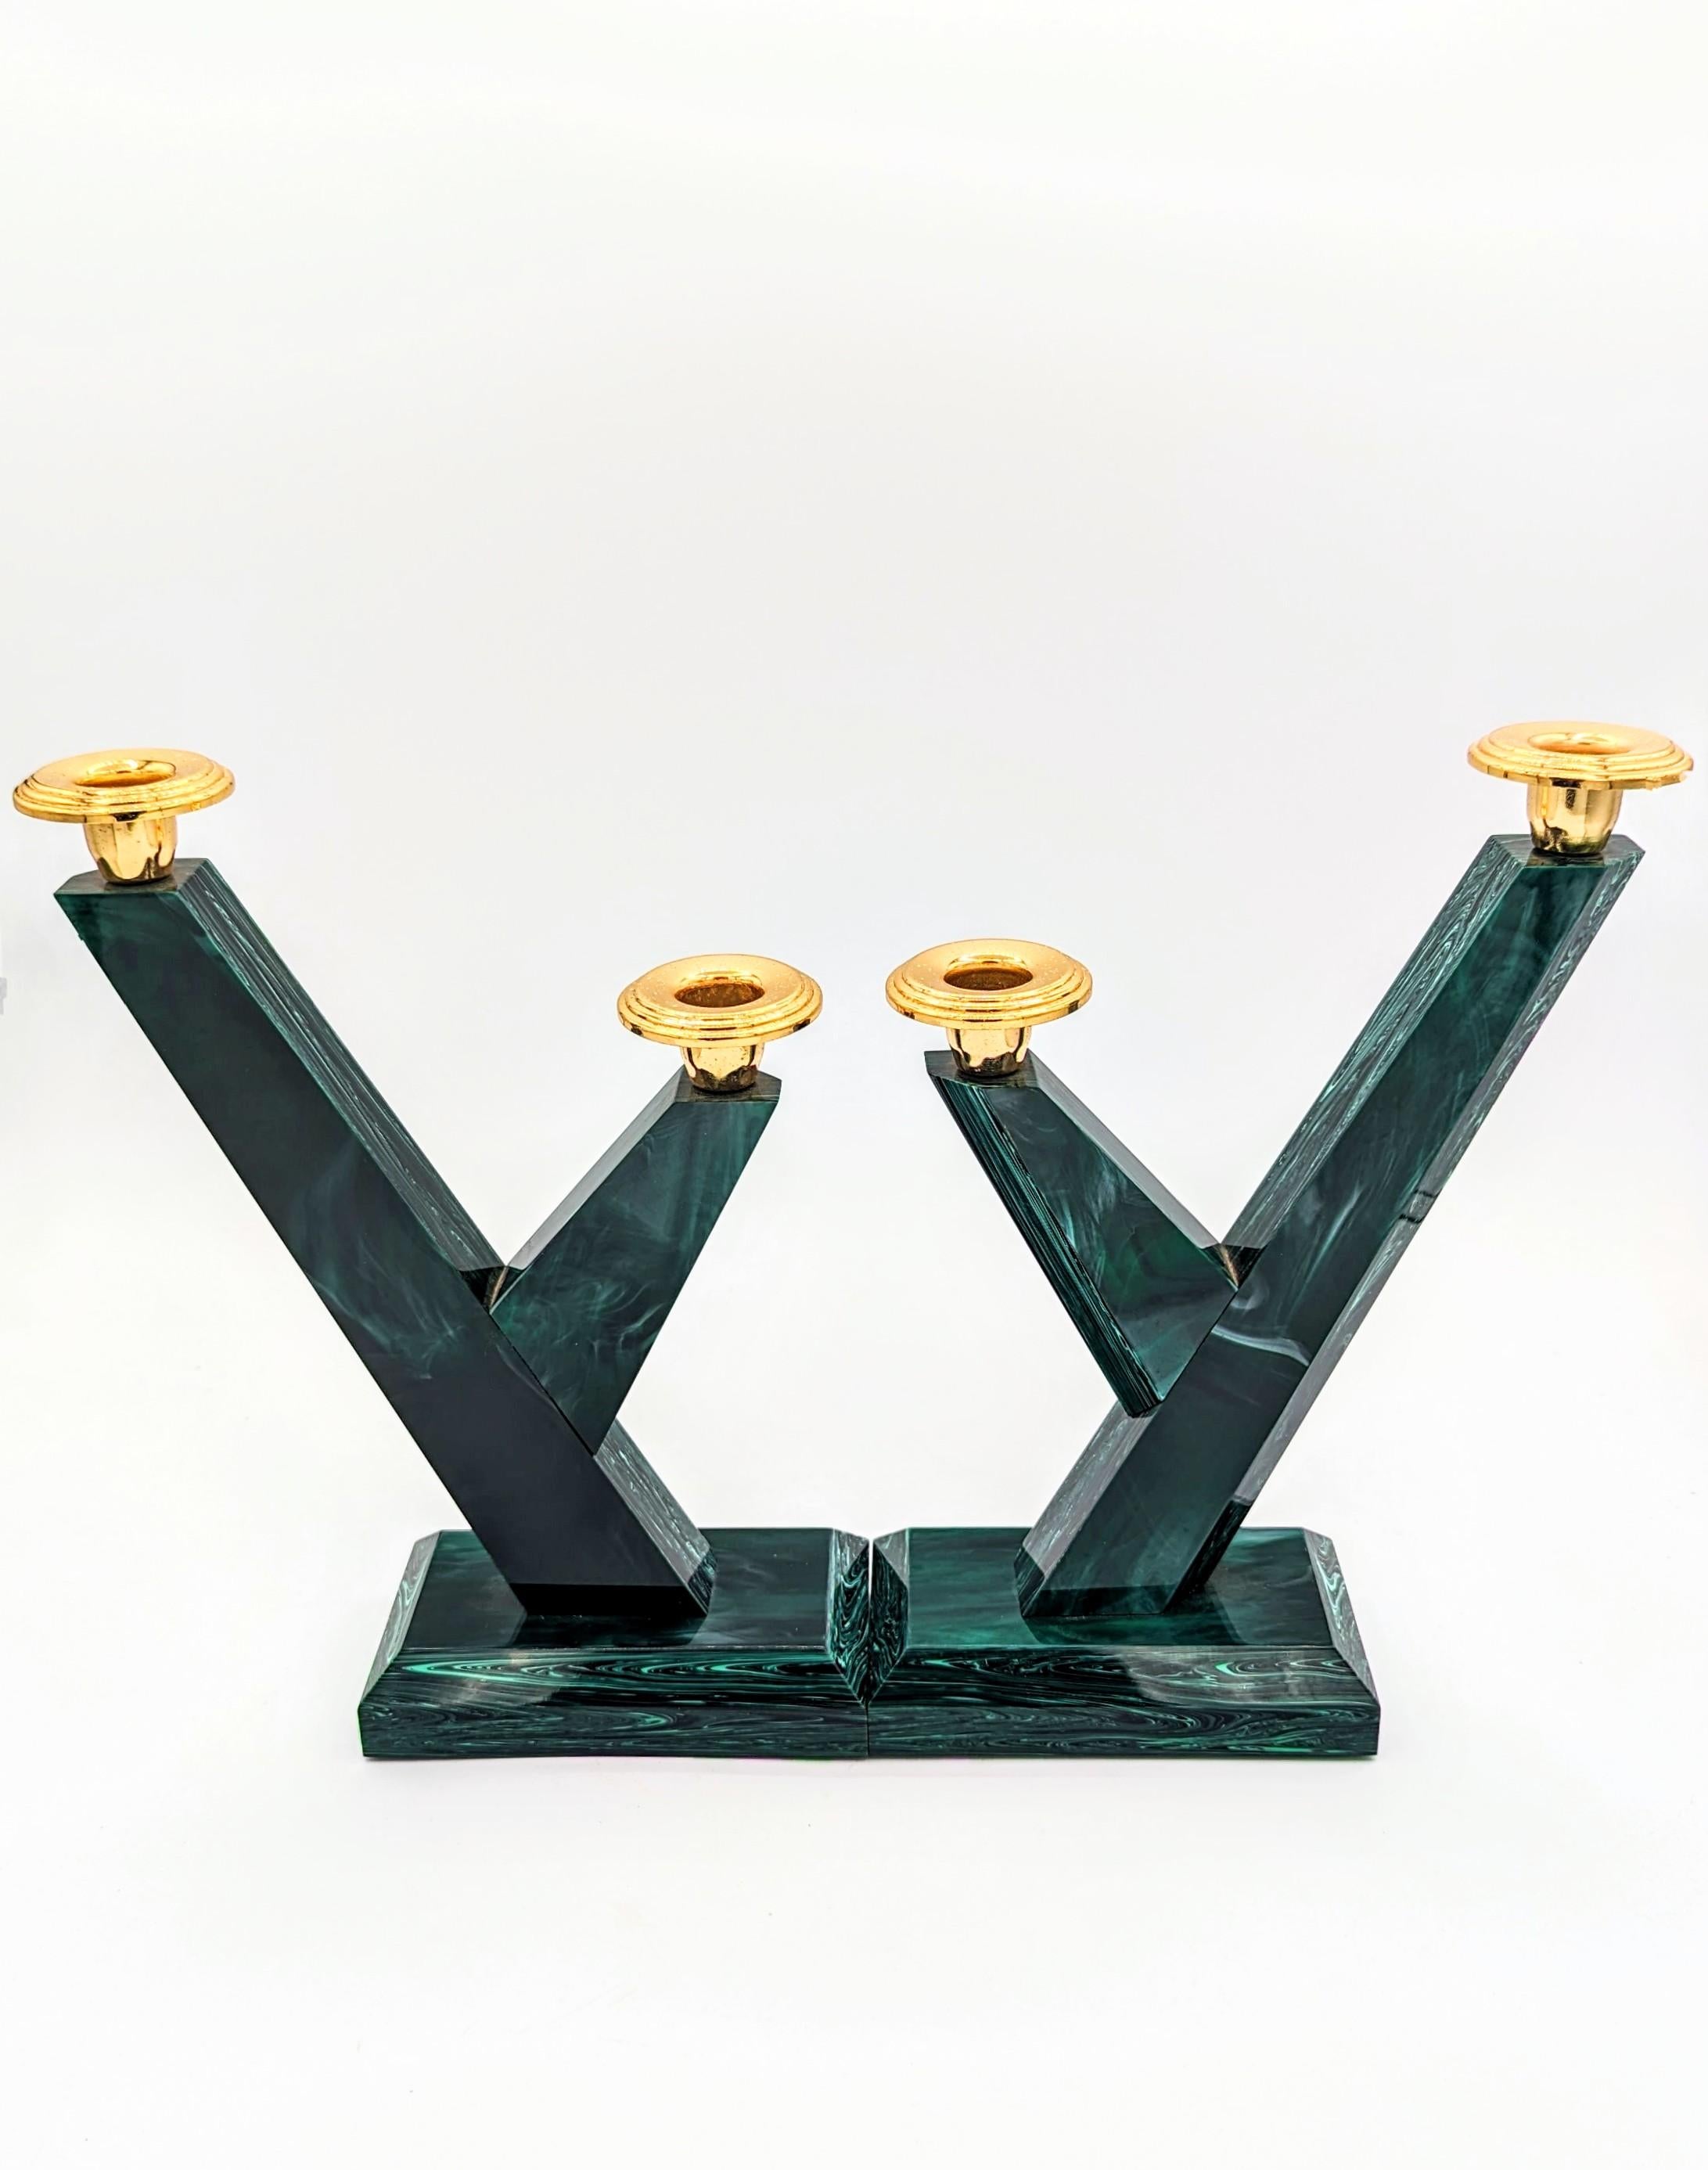 20th Century Pair of Bakelite Candlestick, France 1960s For Sale